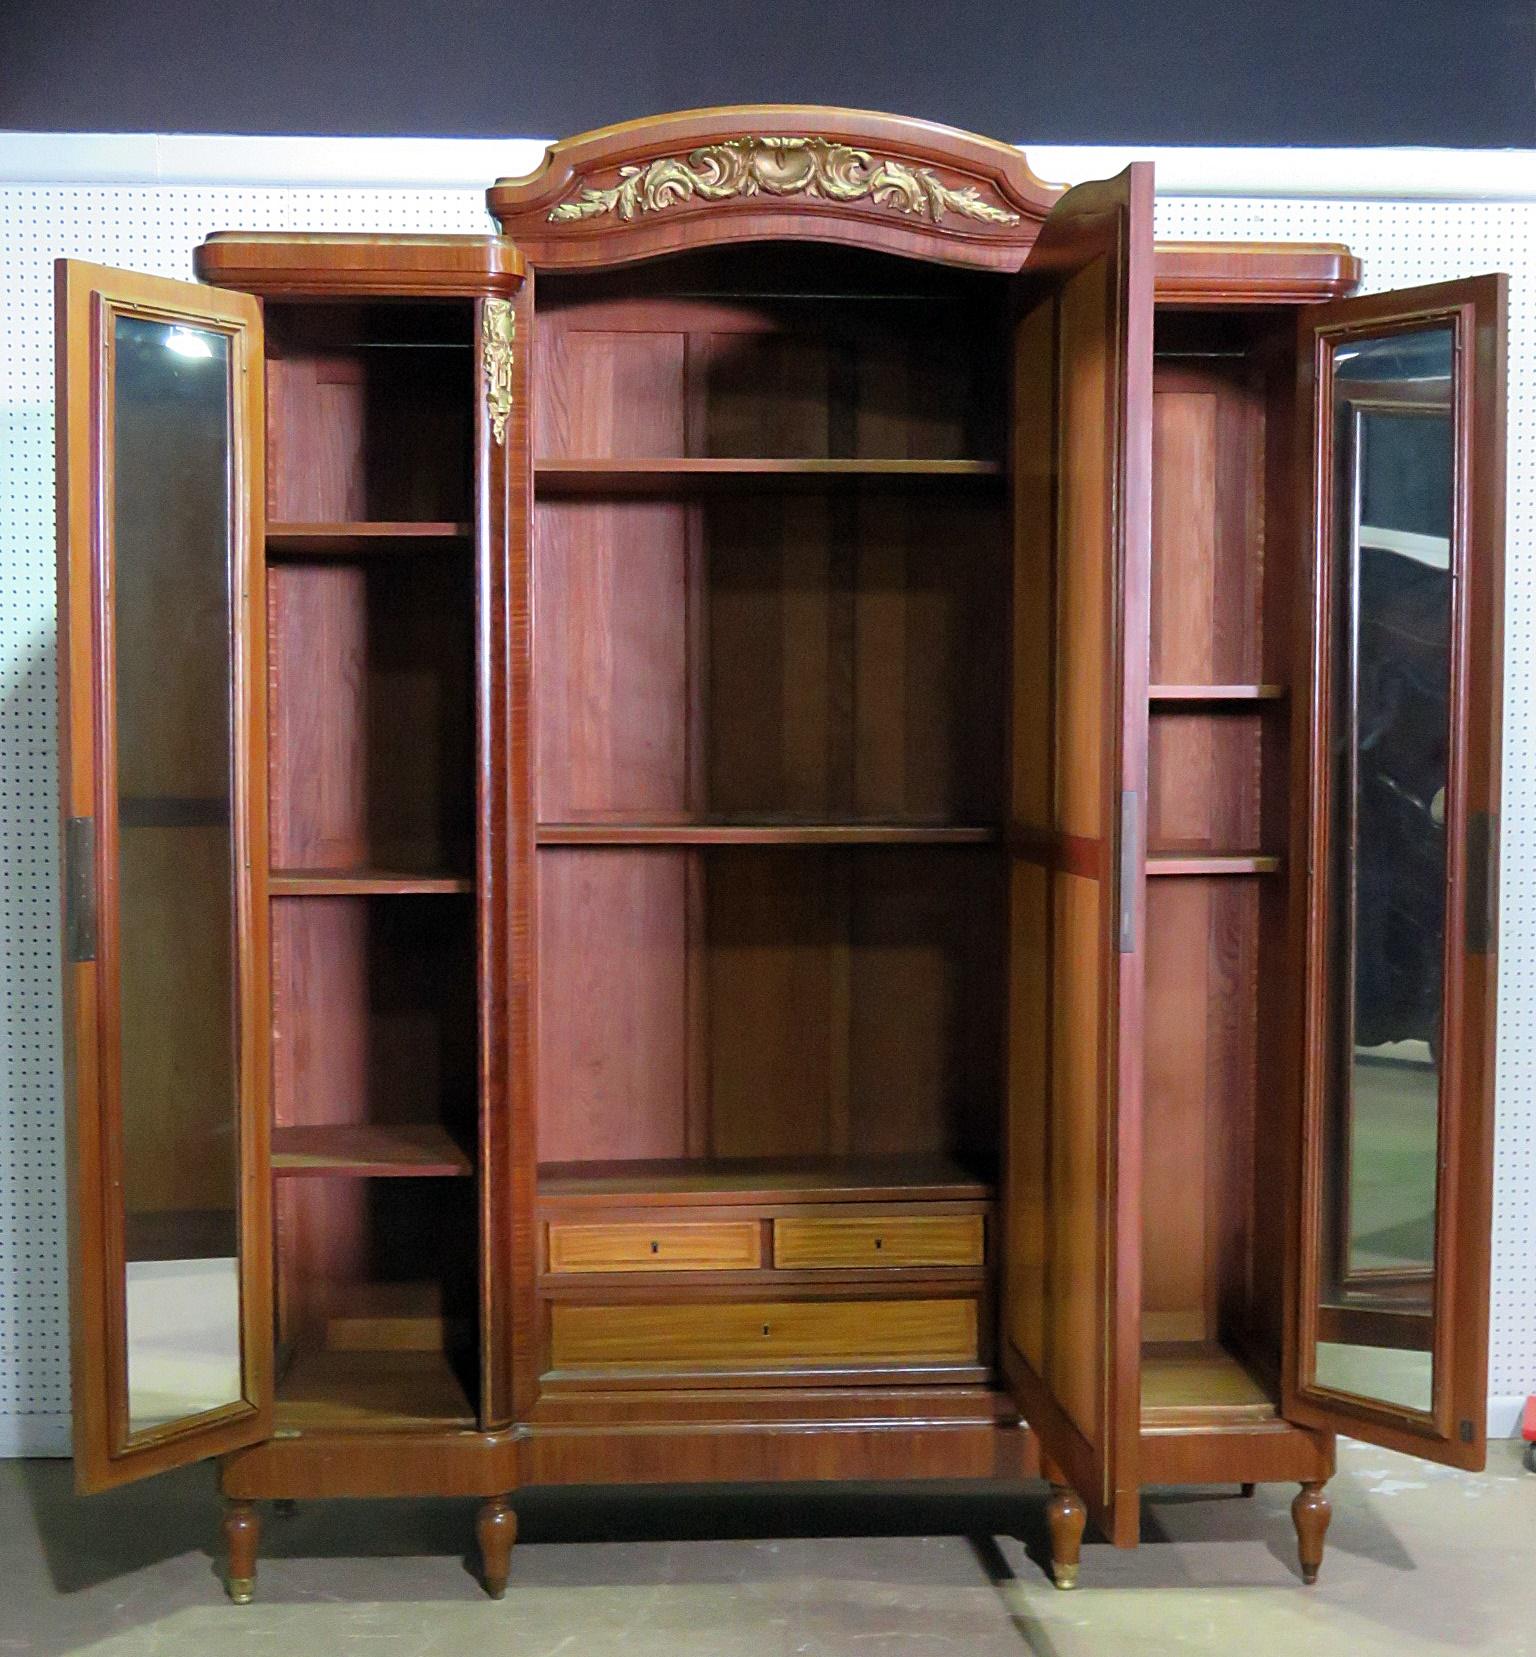 F. Linke style inlaid armoire with bronze accents. The center door has a beveled mirror and contains 2 shelves. The left door contains 3 shelves and the right door contains 2 shelves. Both side doors are mirrored internally.